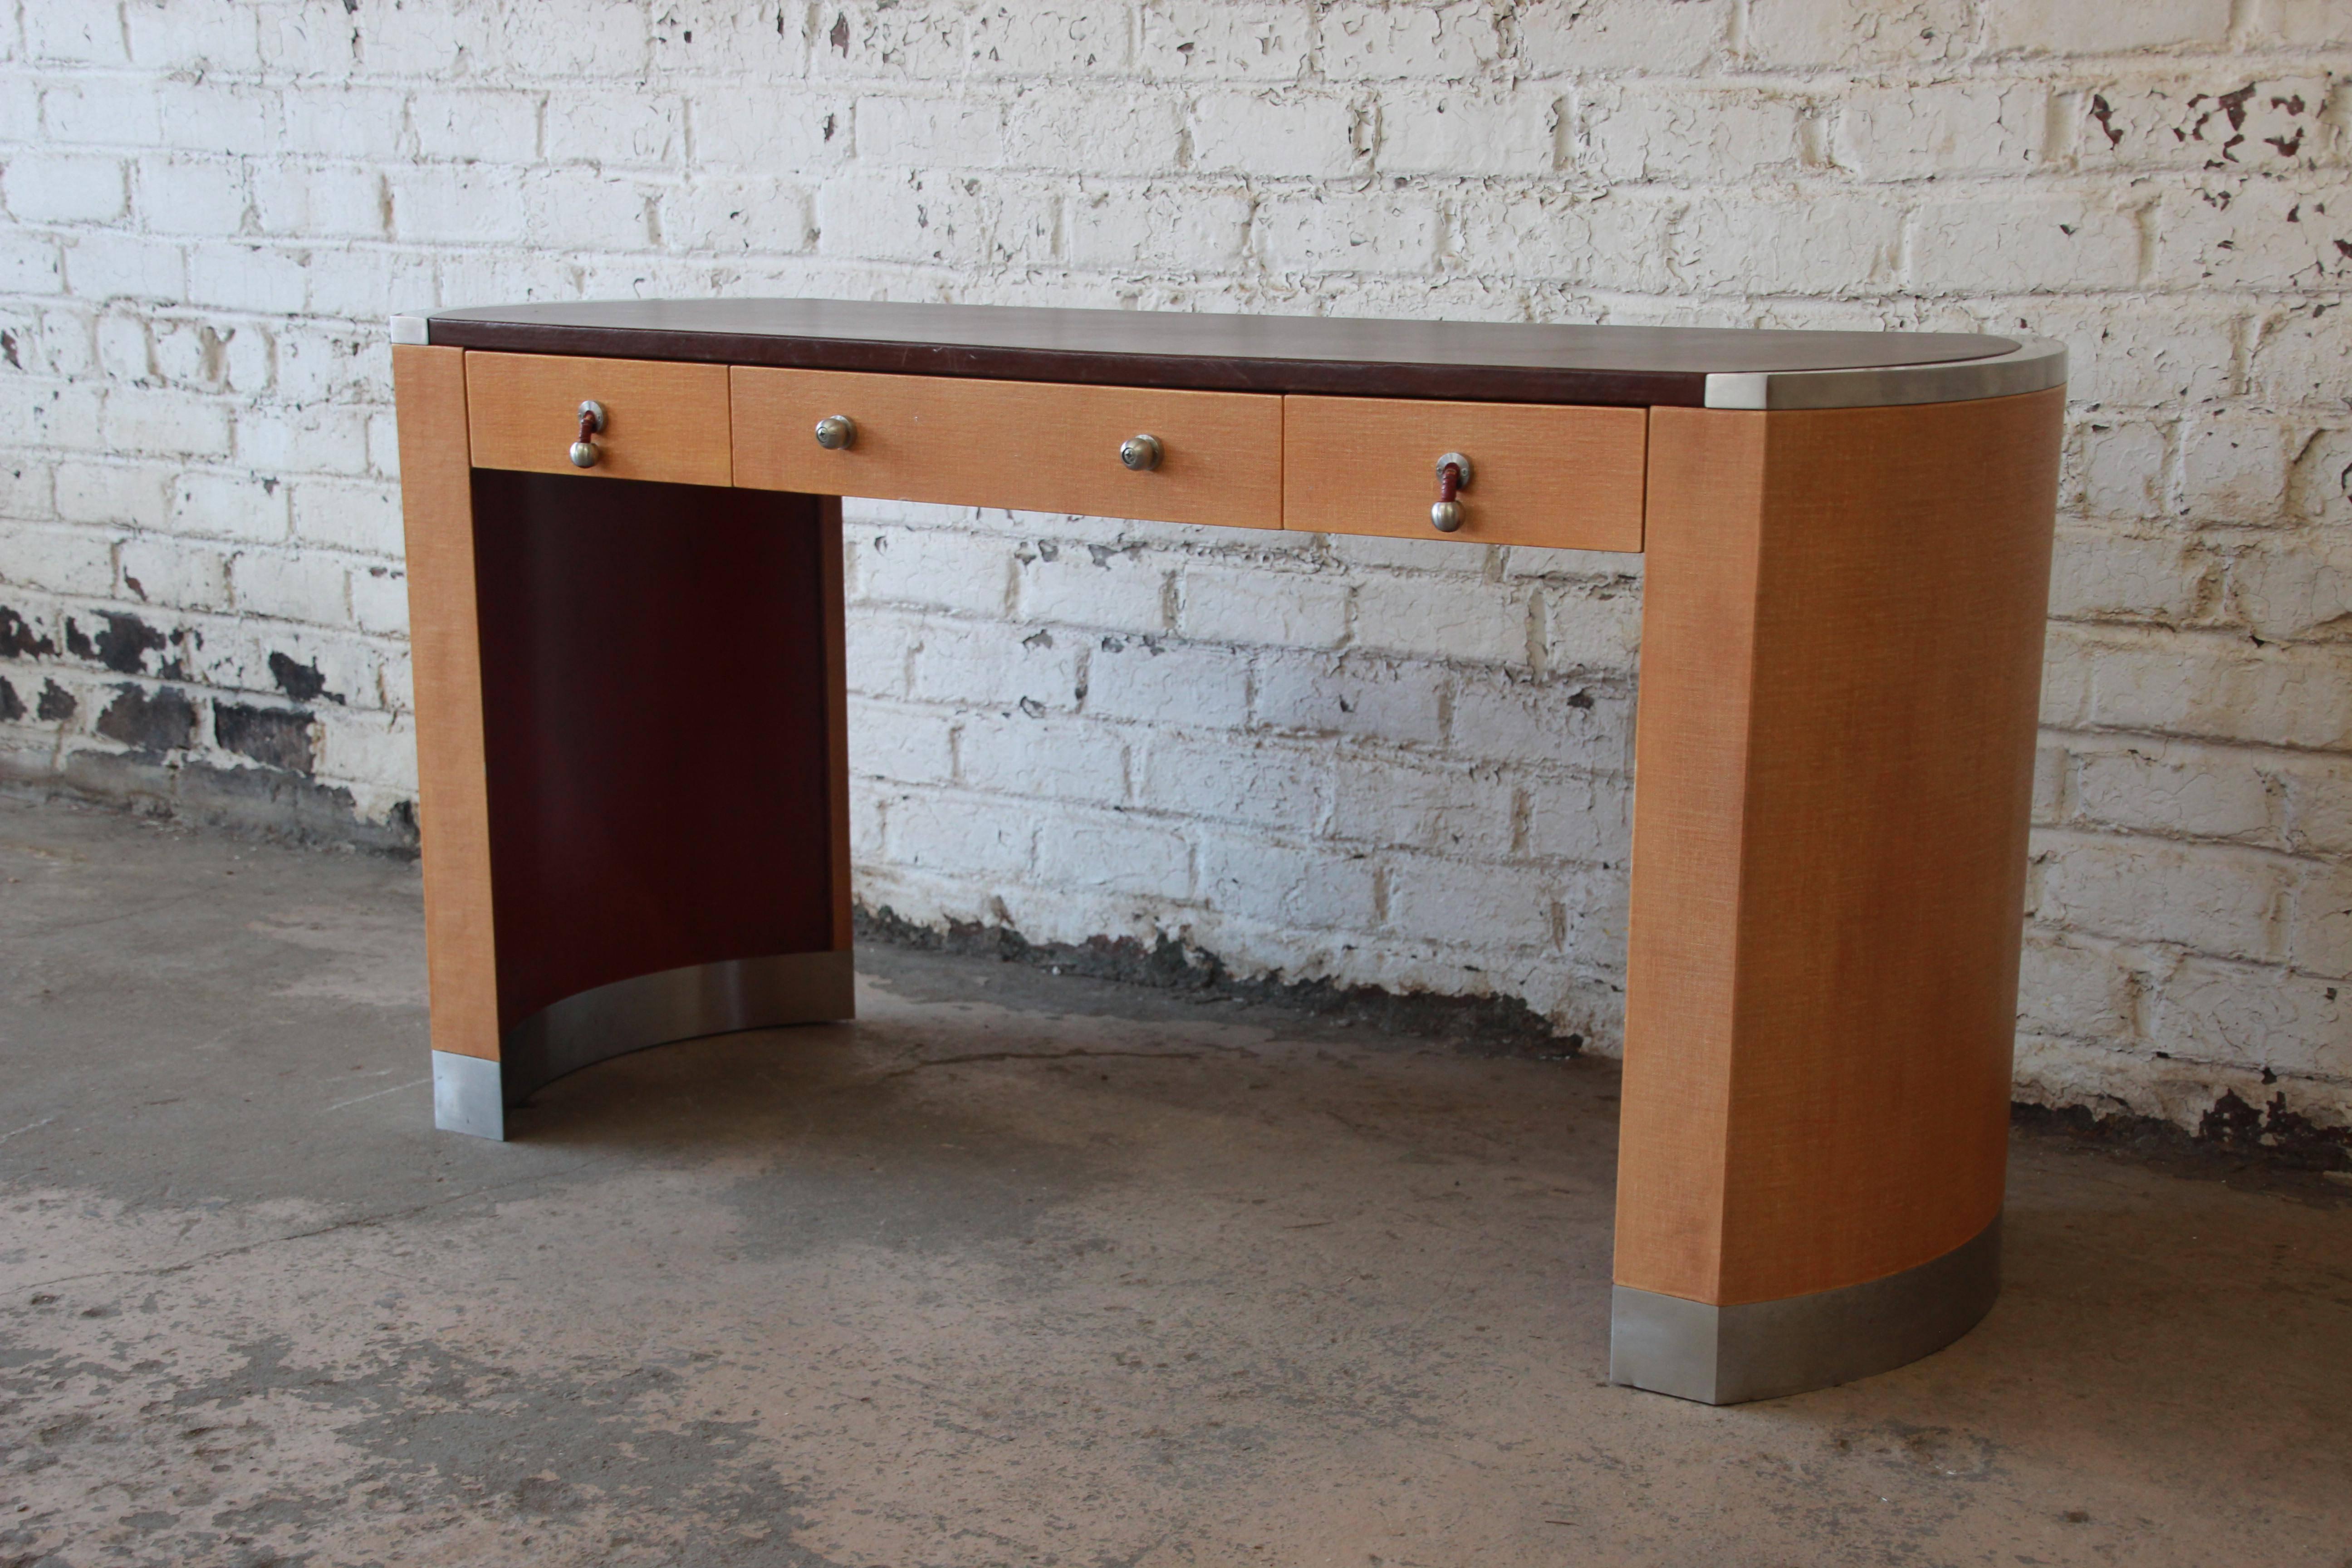 An exceptional modern Art Deco style desk designed by David Easton for Henredon. The desk features a nice brown leather writing surface, banded chrome edges at the top and bottom, and curved linen sides. It has three drawers that open and close